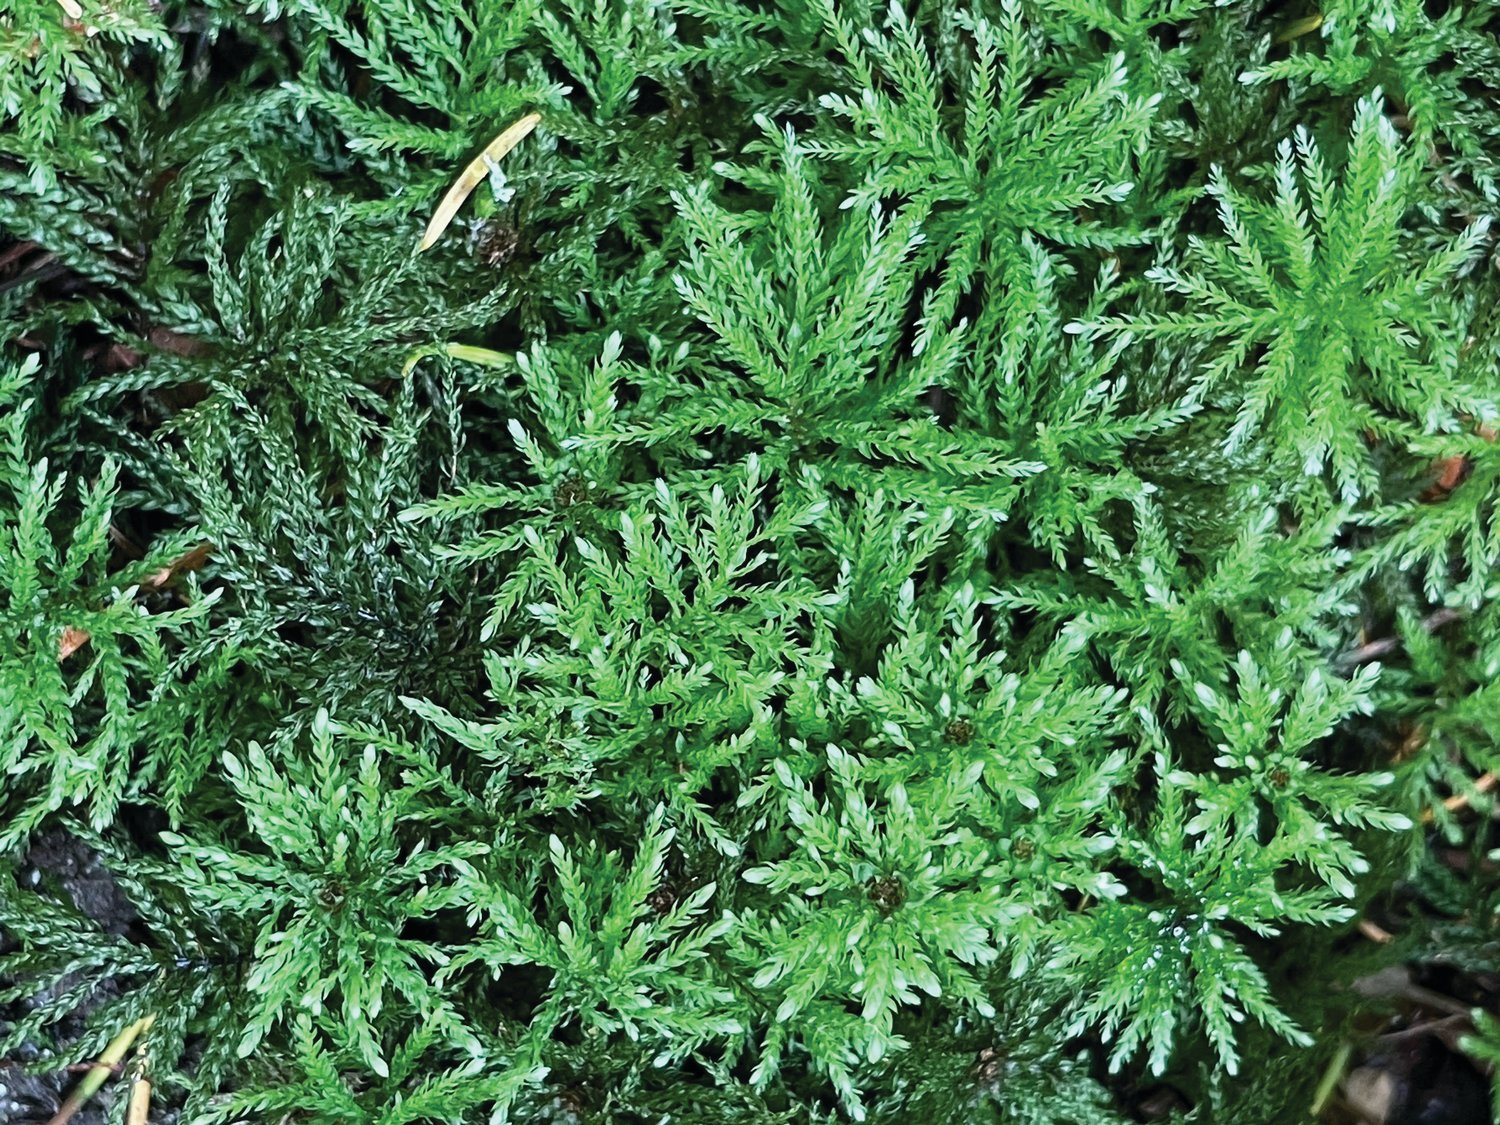 Detail of Menzies’ Tree Moss thriving in the moist lowland forest in Fort Townsend State Park. Moss improves soil quality, filters 
contaminants, and conserves water in the garden or forest.